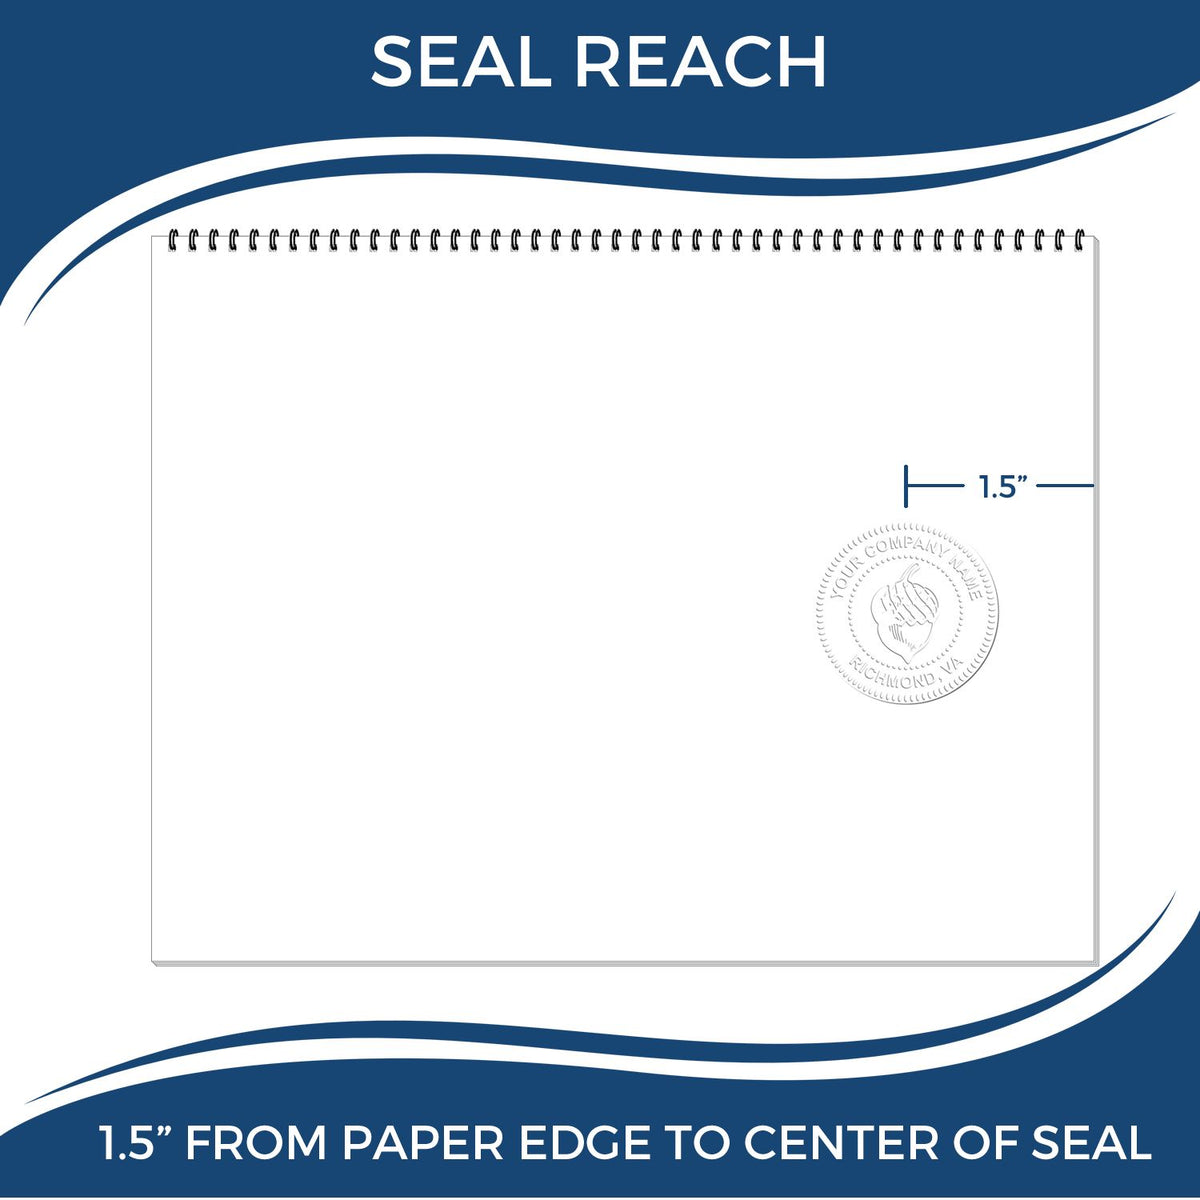 An infographic showing the seal reach which is represented by a ruler and a miniature seal image of the Virginia Geologist Desk Seal